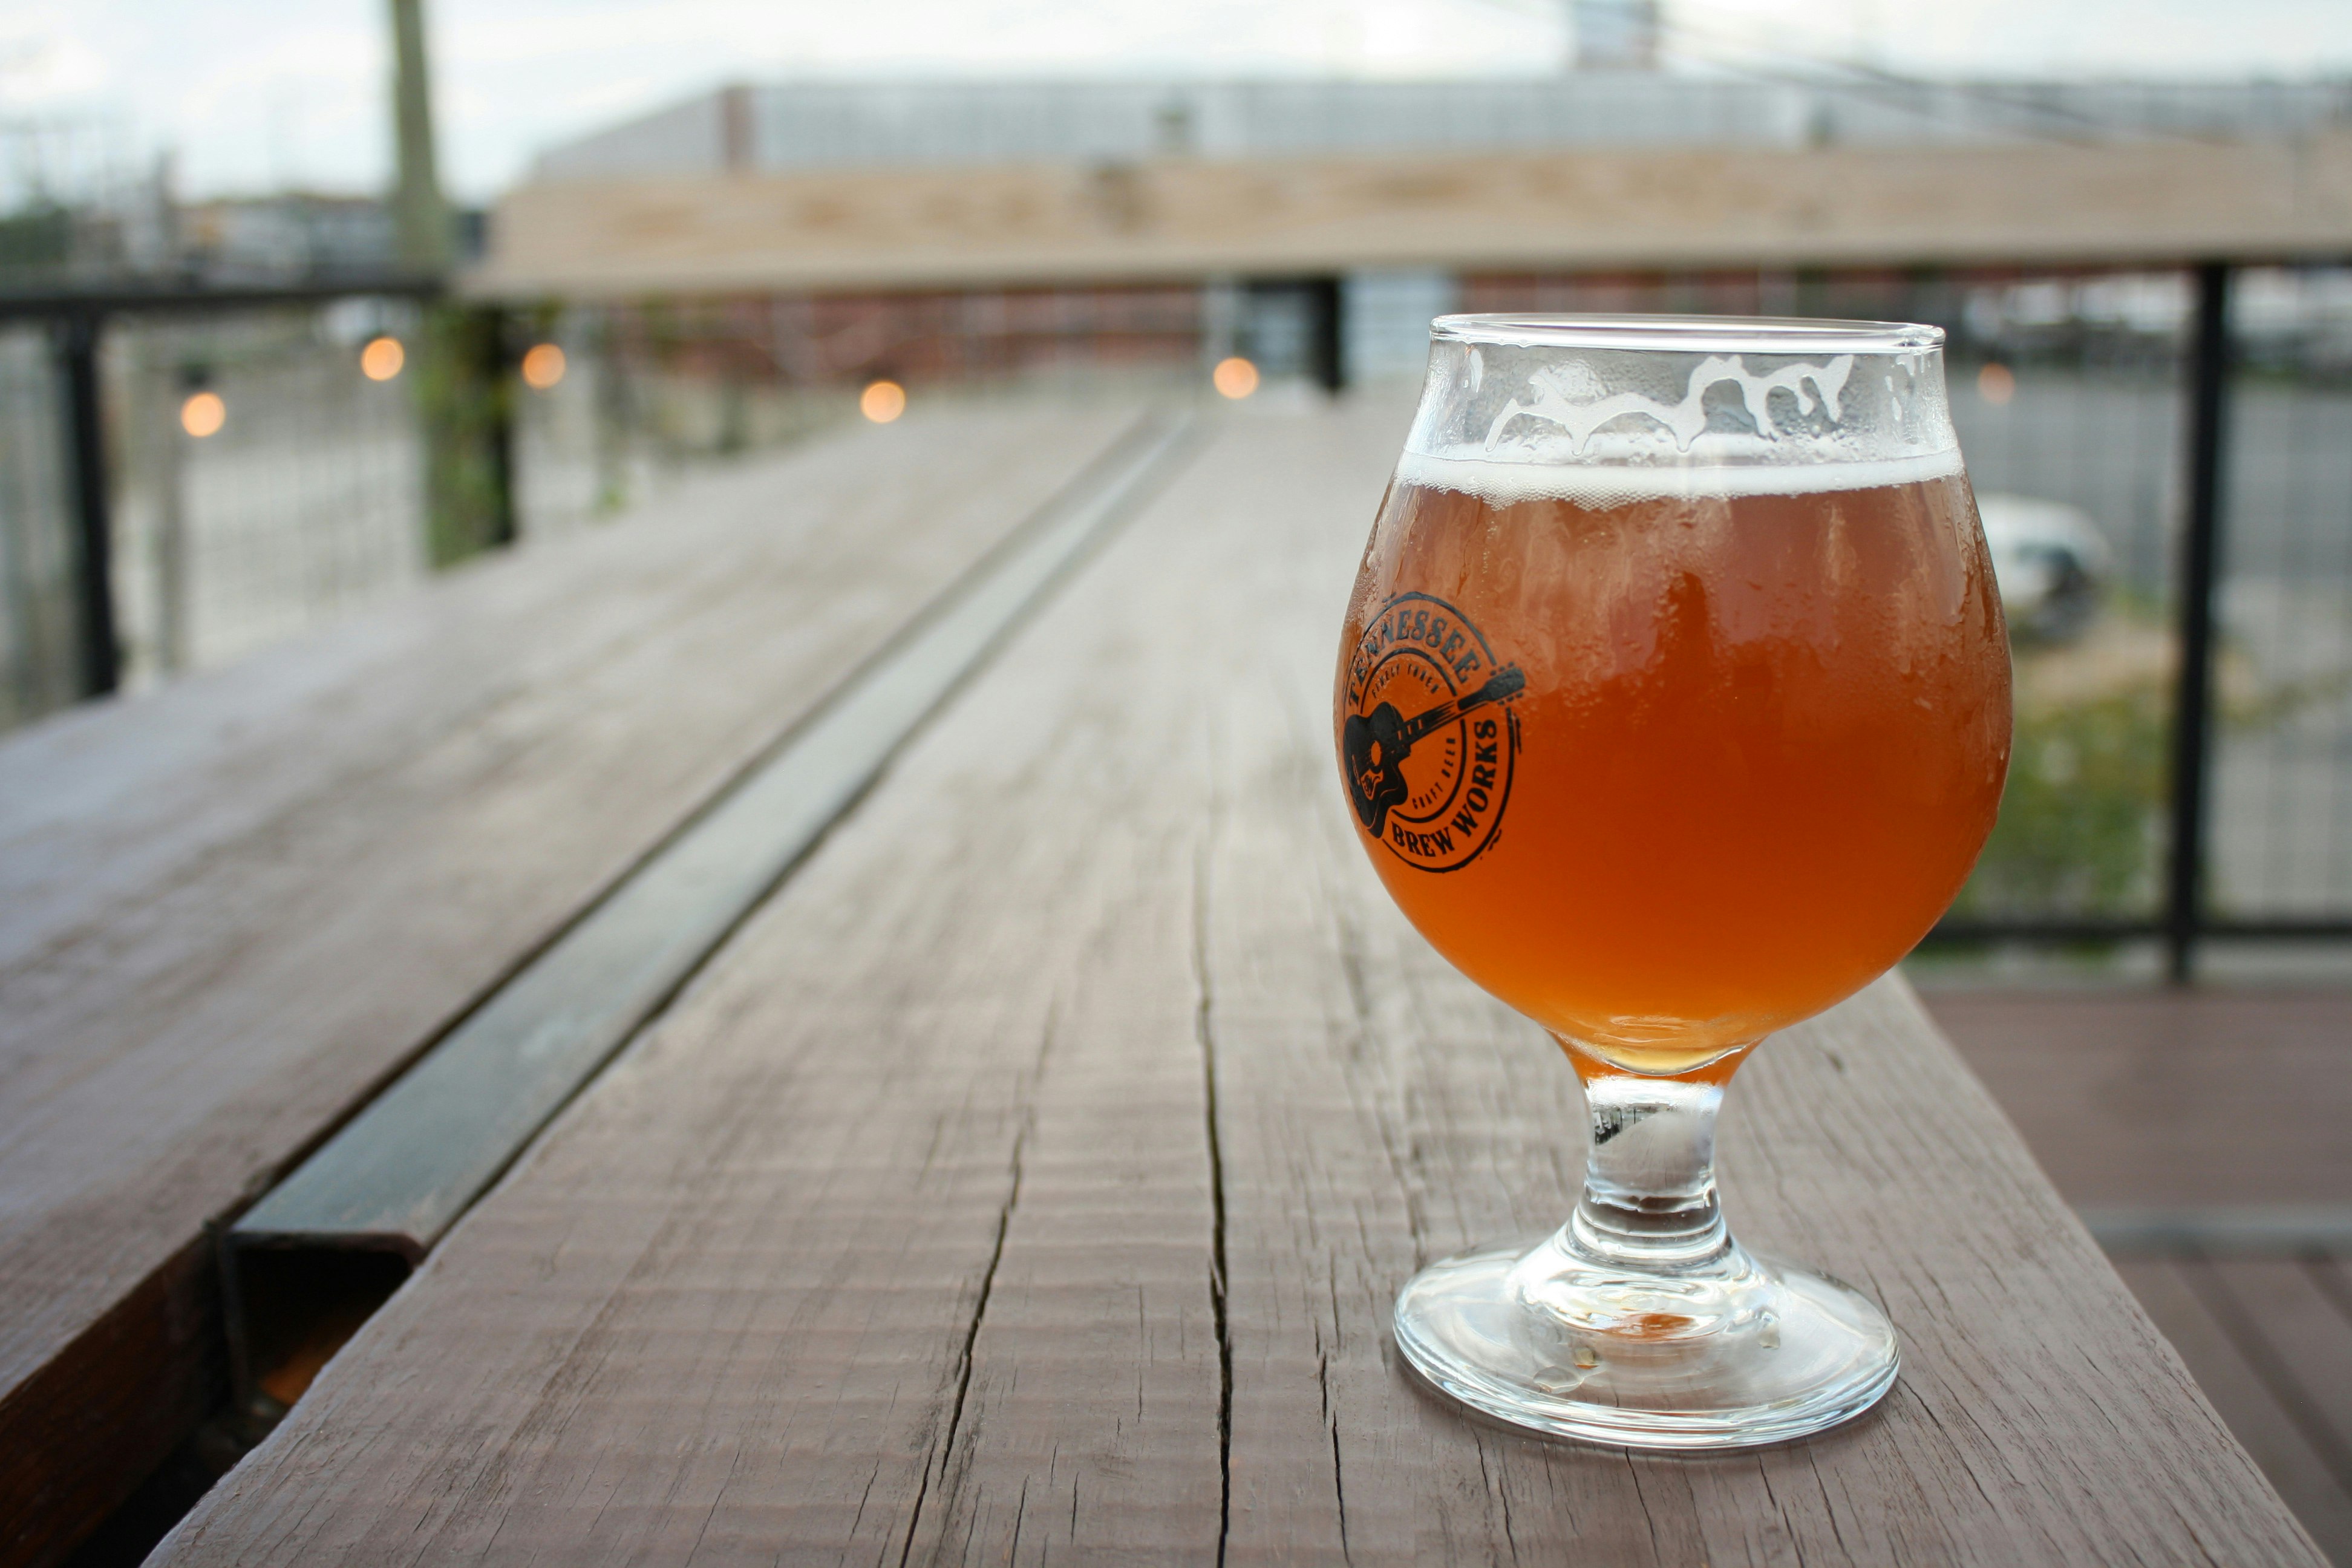 A pint on the patio at Tennessee Brew Works. Image by Alexander Howard / Lonely Planet